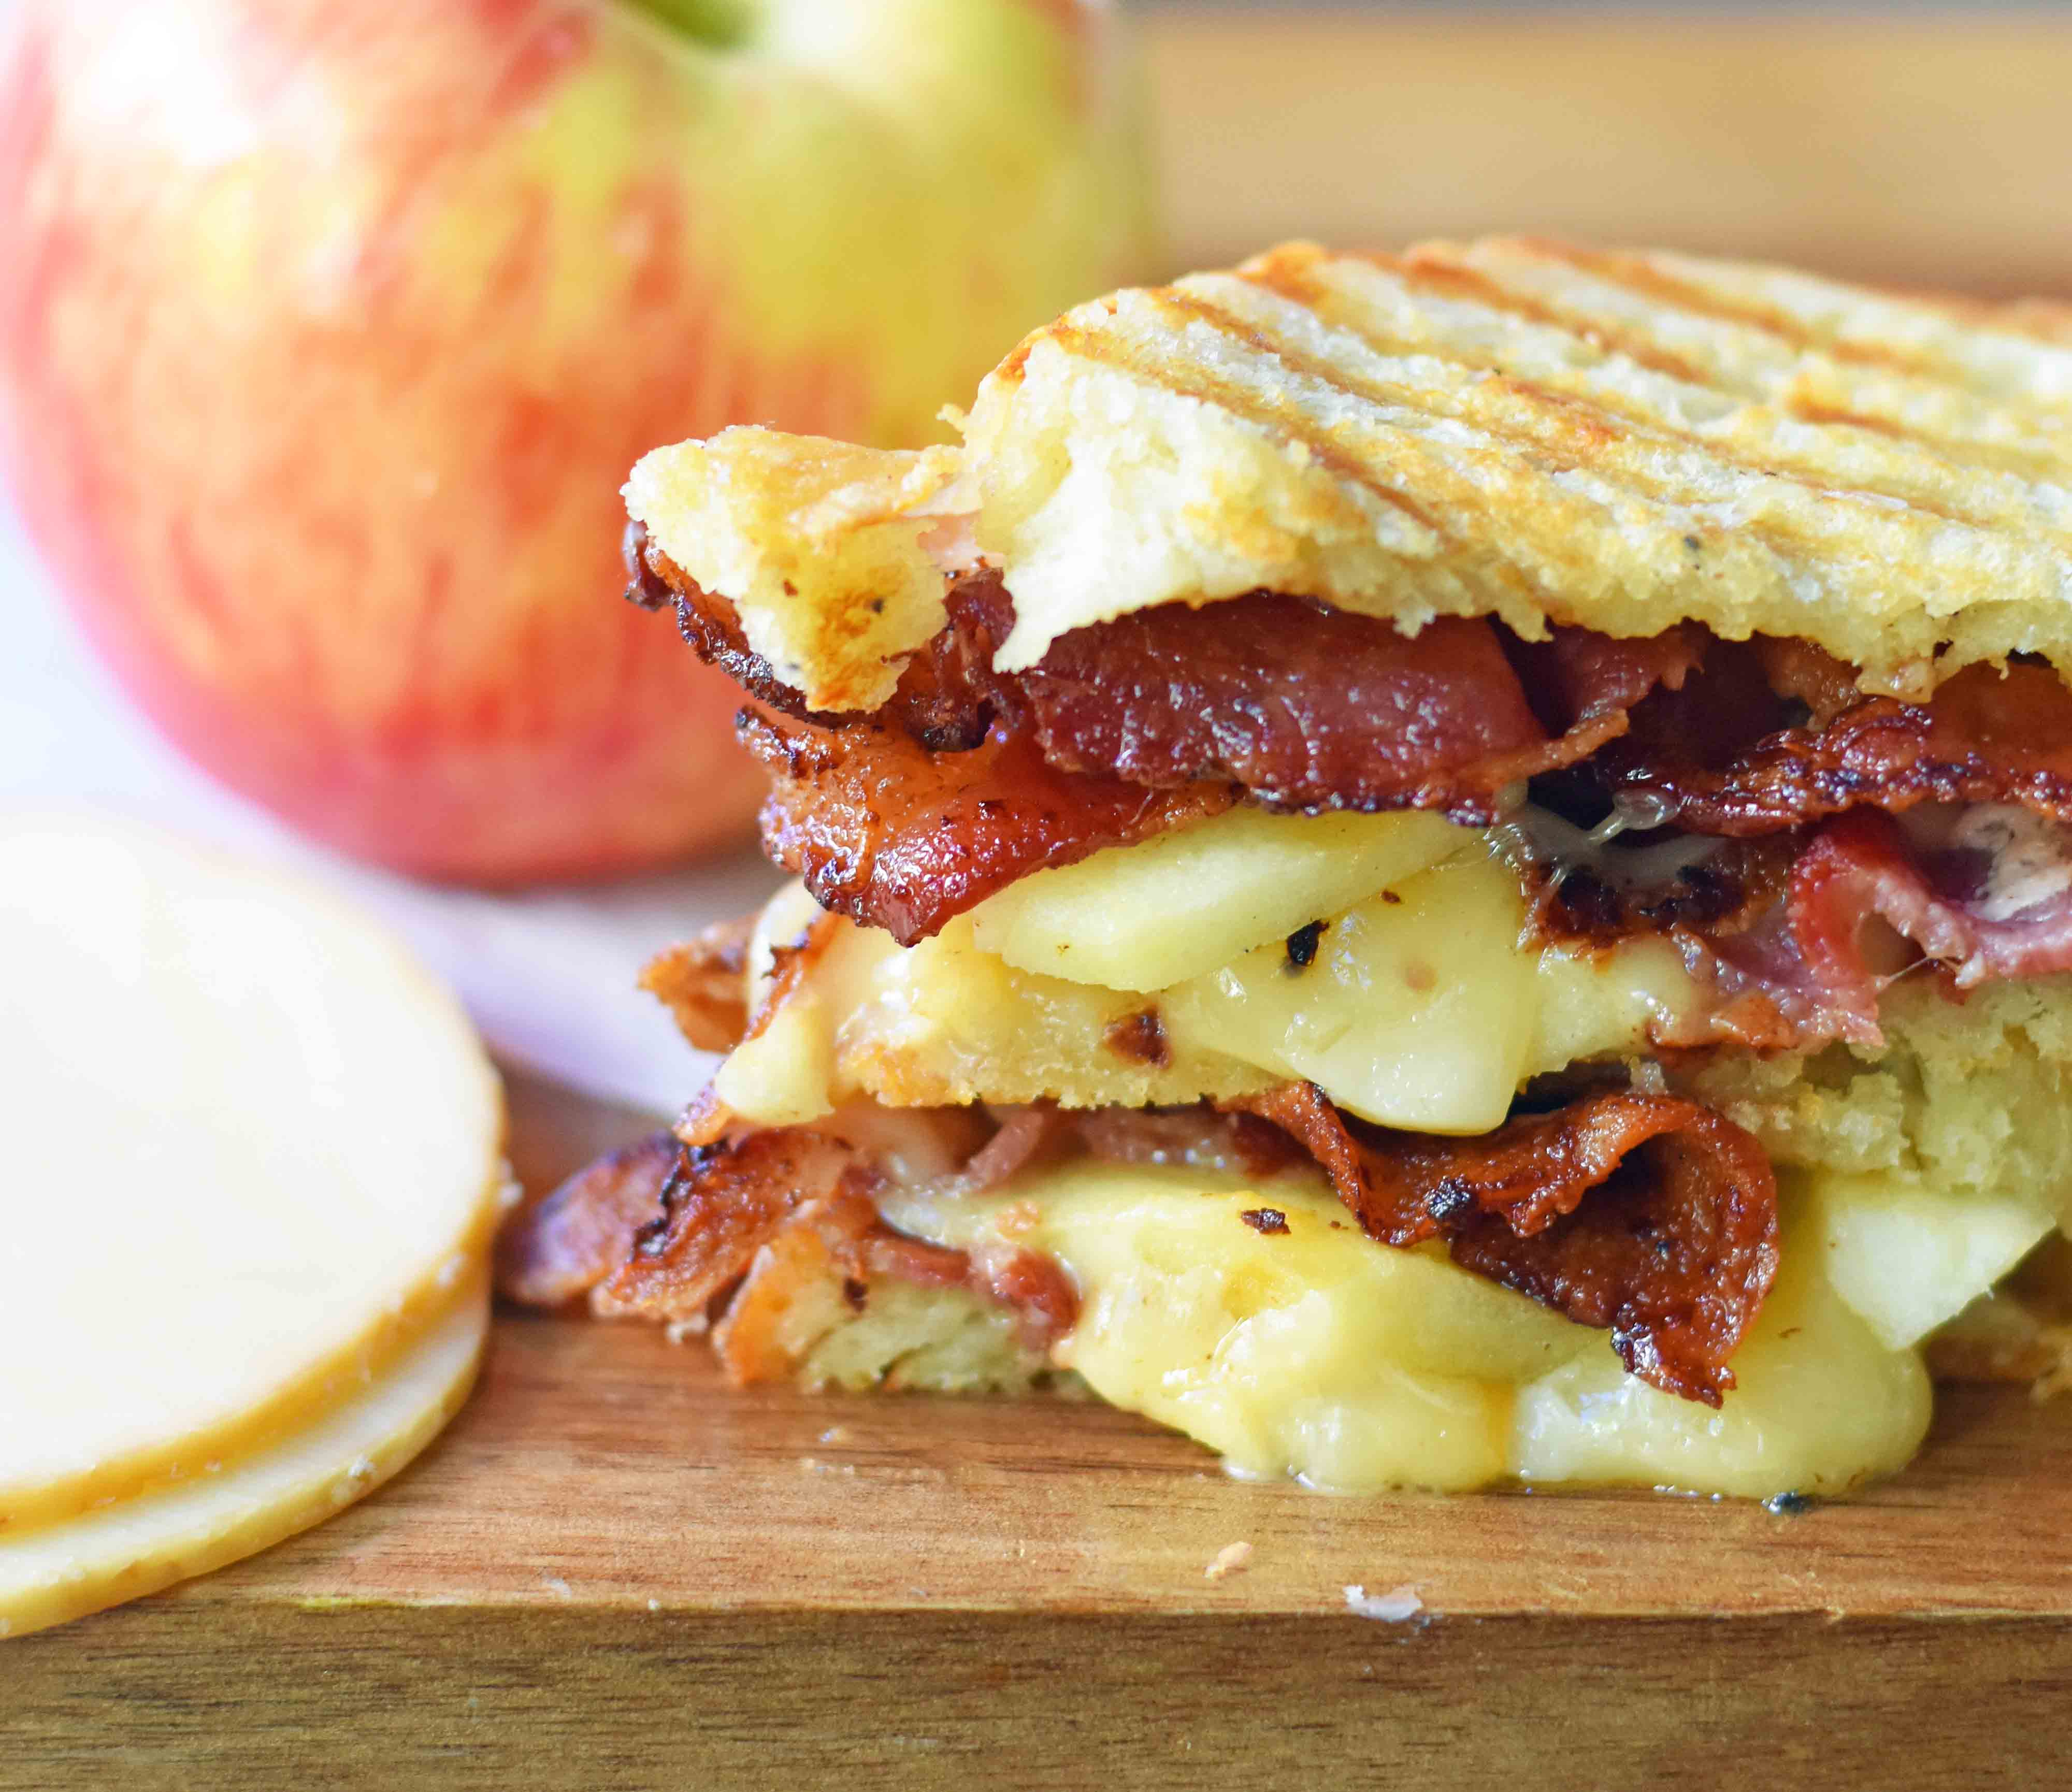 A gourmet grilled cheese sandwich made with smoked gouda cheese, sweet crisp Honeycrisp apple slices, and crispy bacon all on sourdough bread. How to make the perfect grilled cheese sandwich. Tips on how to make the best grilled cheese. www.modernhoney.com